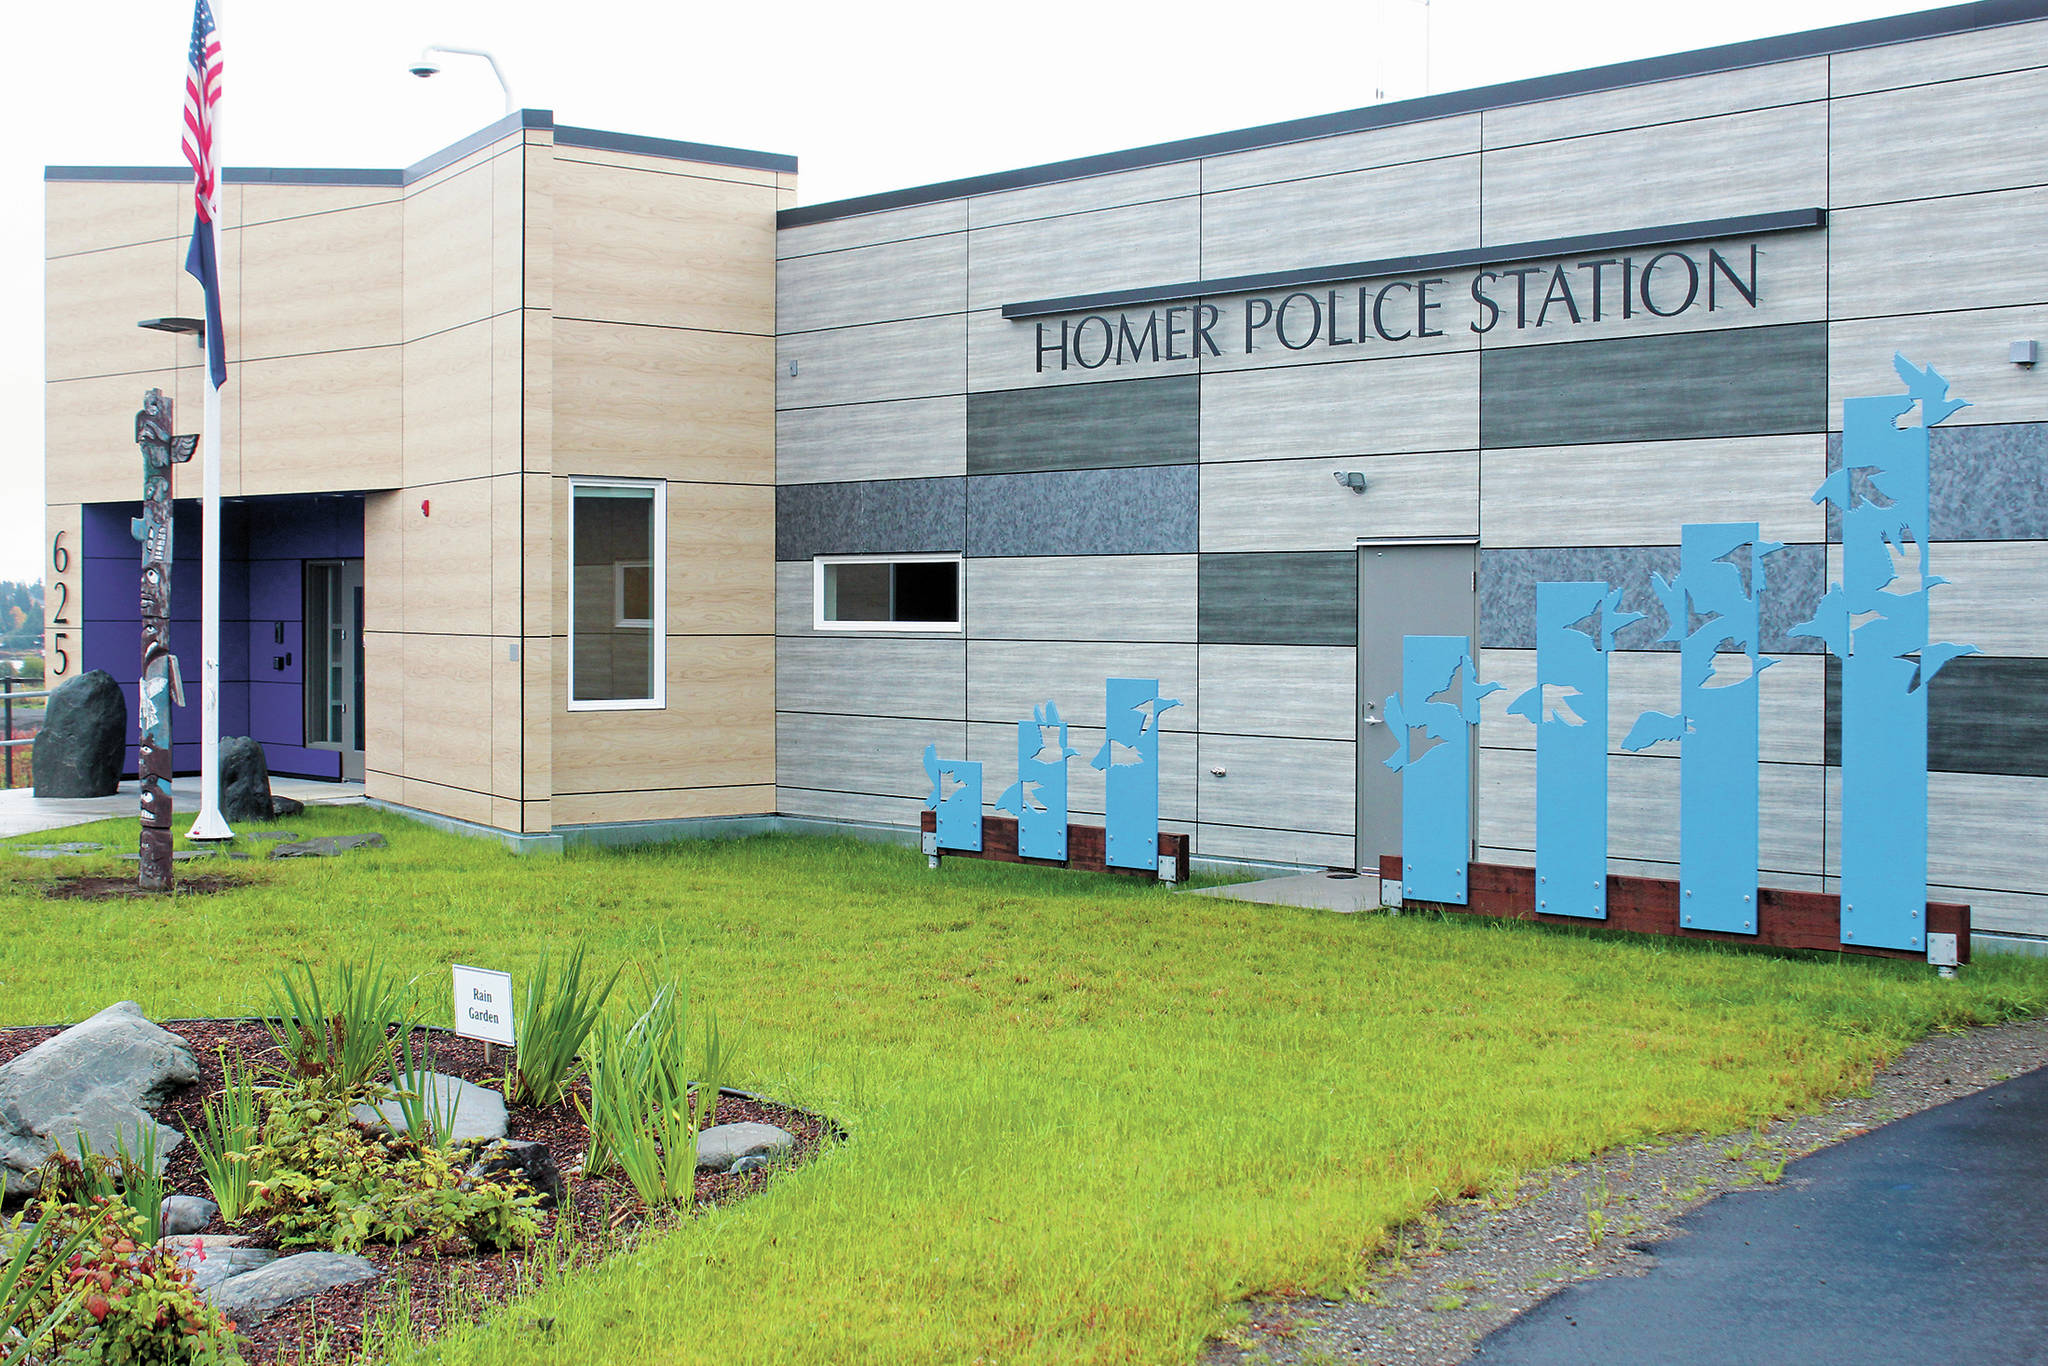 The new Homer Police Station, as seen Thursday, Sept. 24, 2020 in Homer, Alaska. Members of the Homer Police Department officially moved into the building on Thursday. (Photo by Megan Pacer/Homer News)